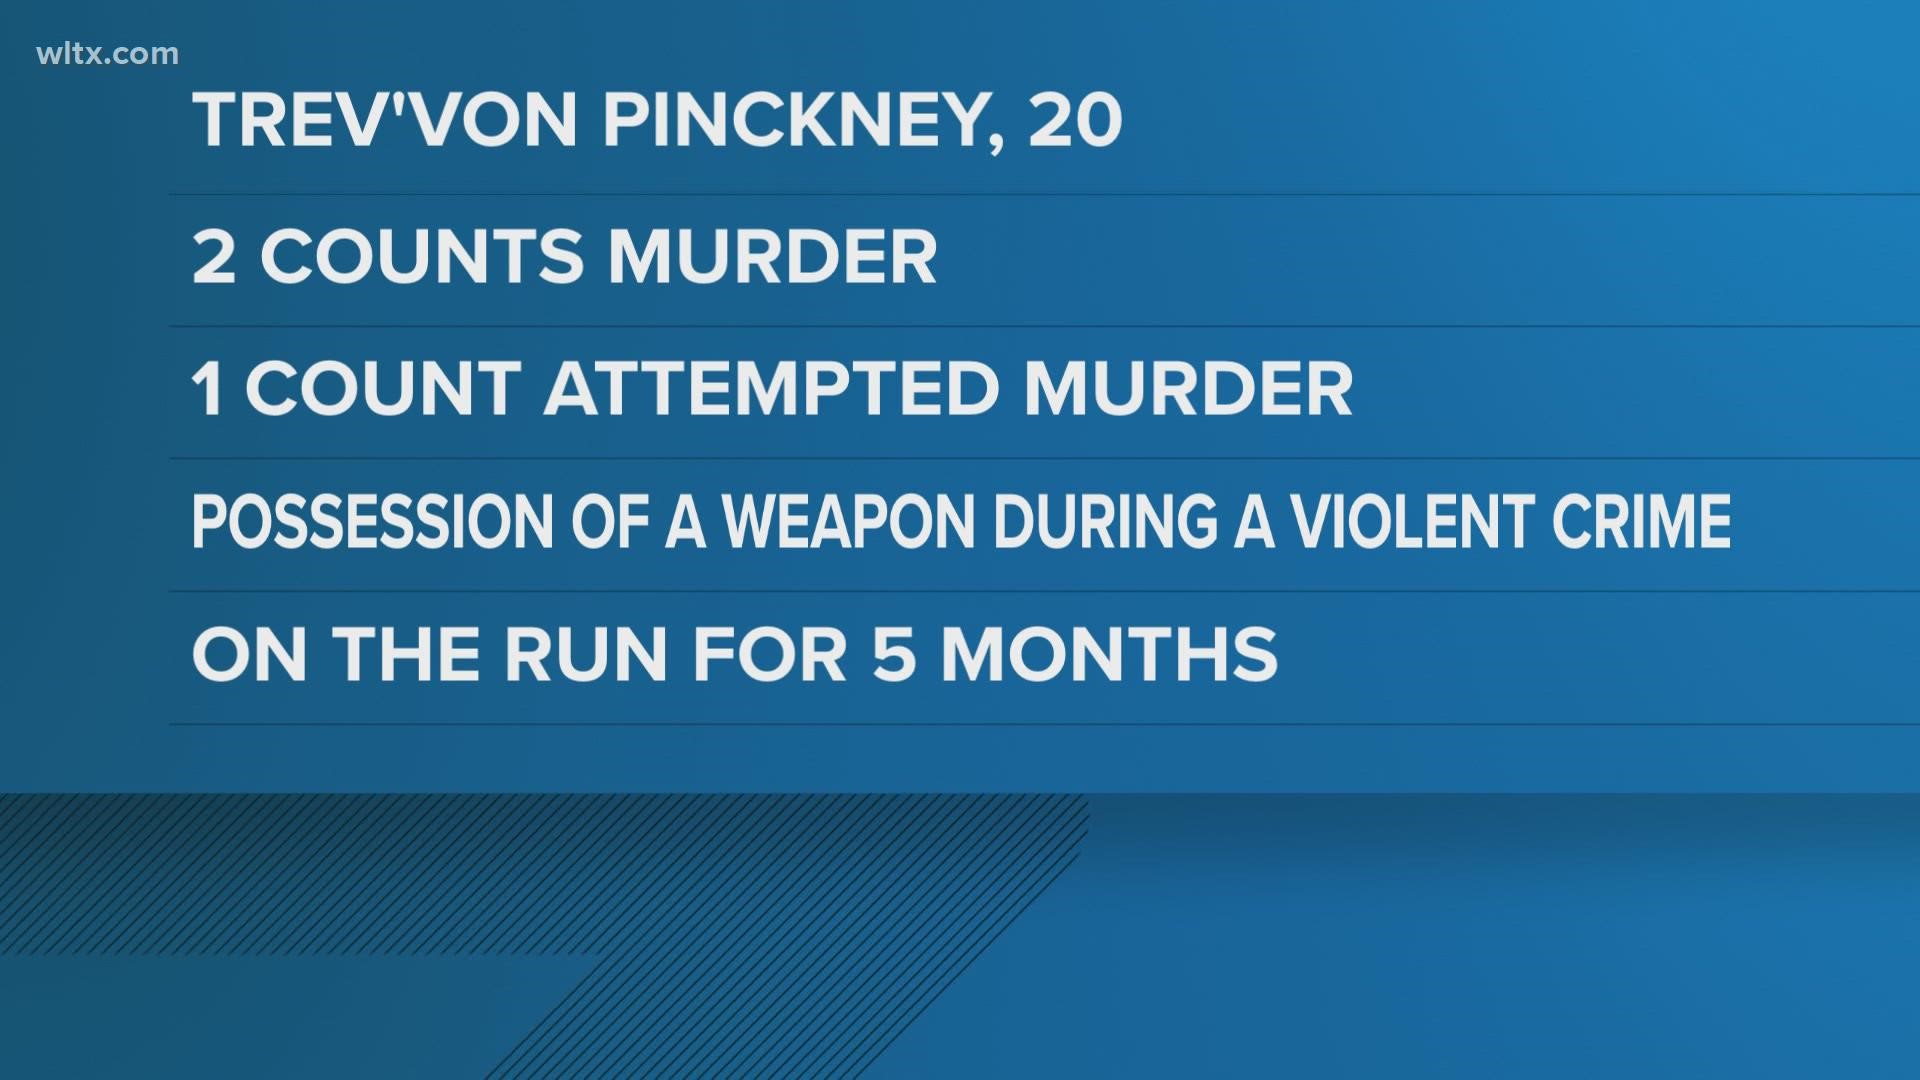 After 5 months on the road, Trev'von Pinckney, 20 is in custody after investigators say he shot and killed two men.